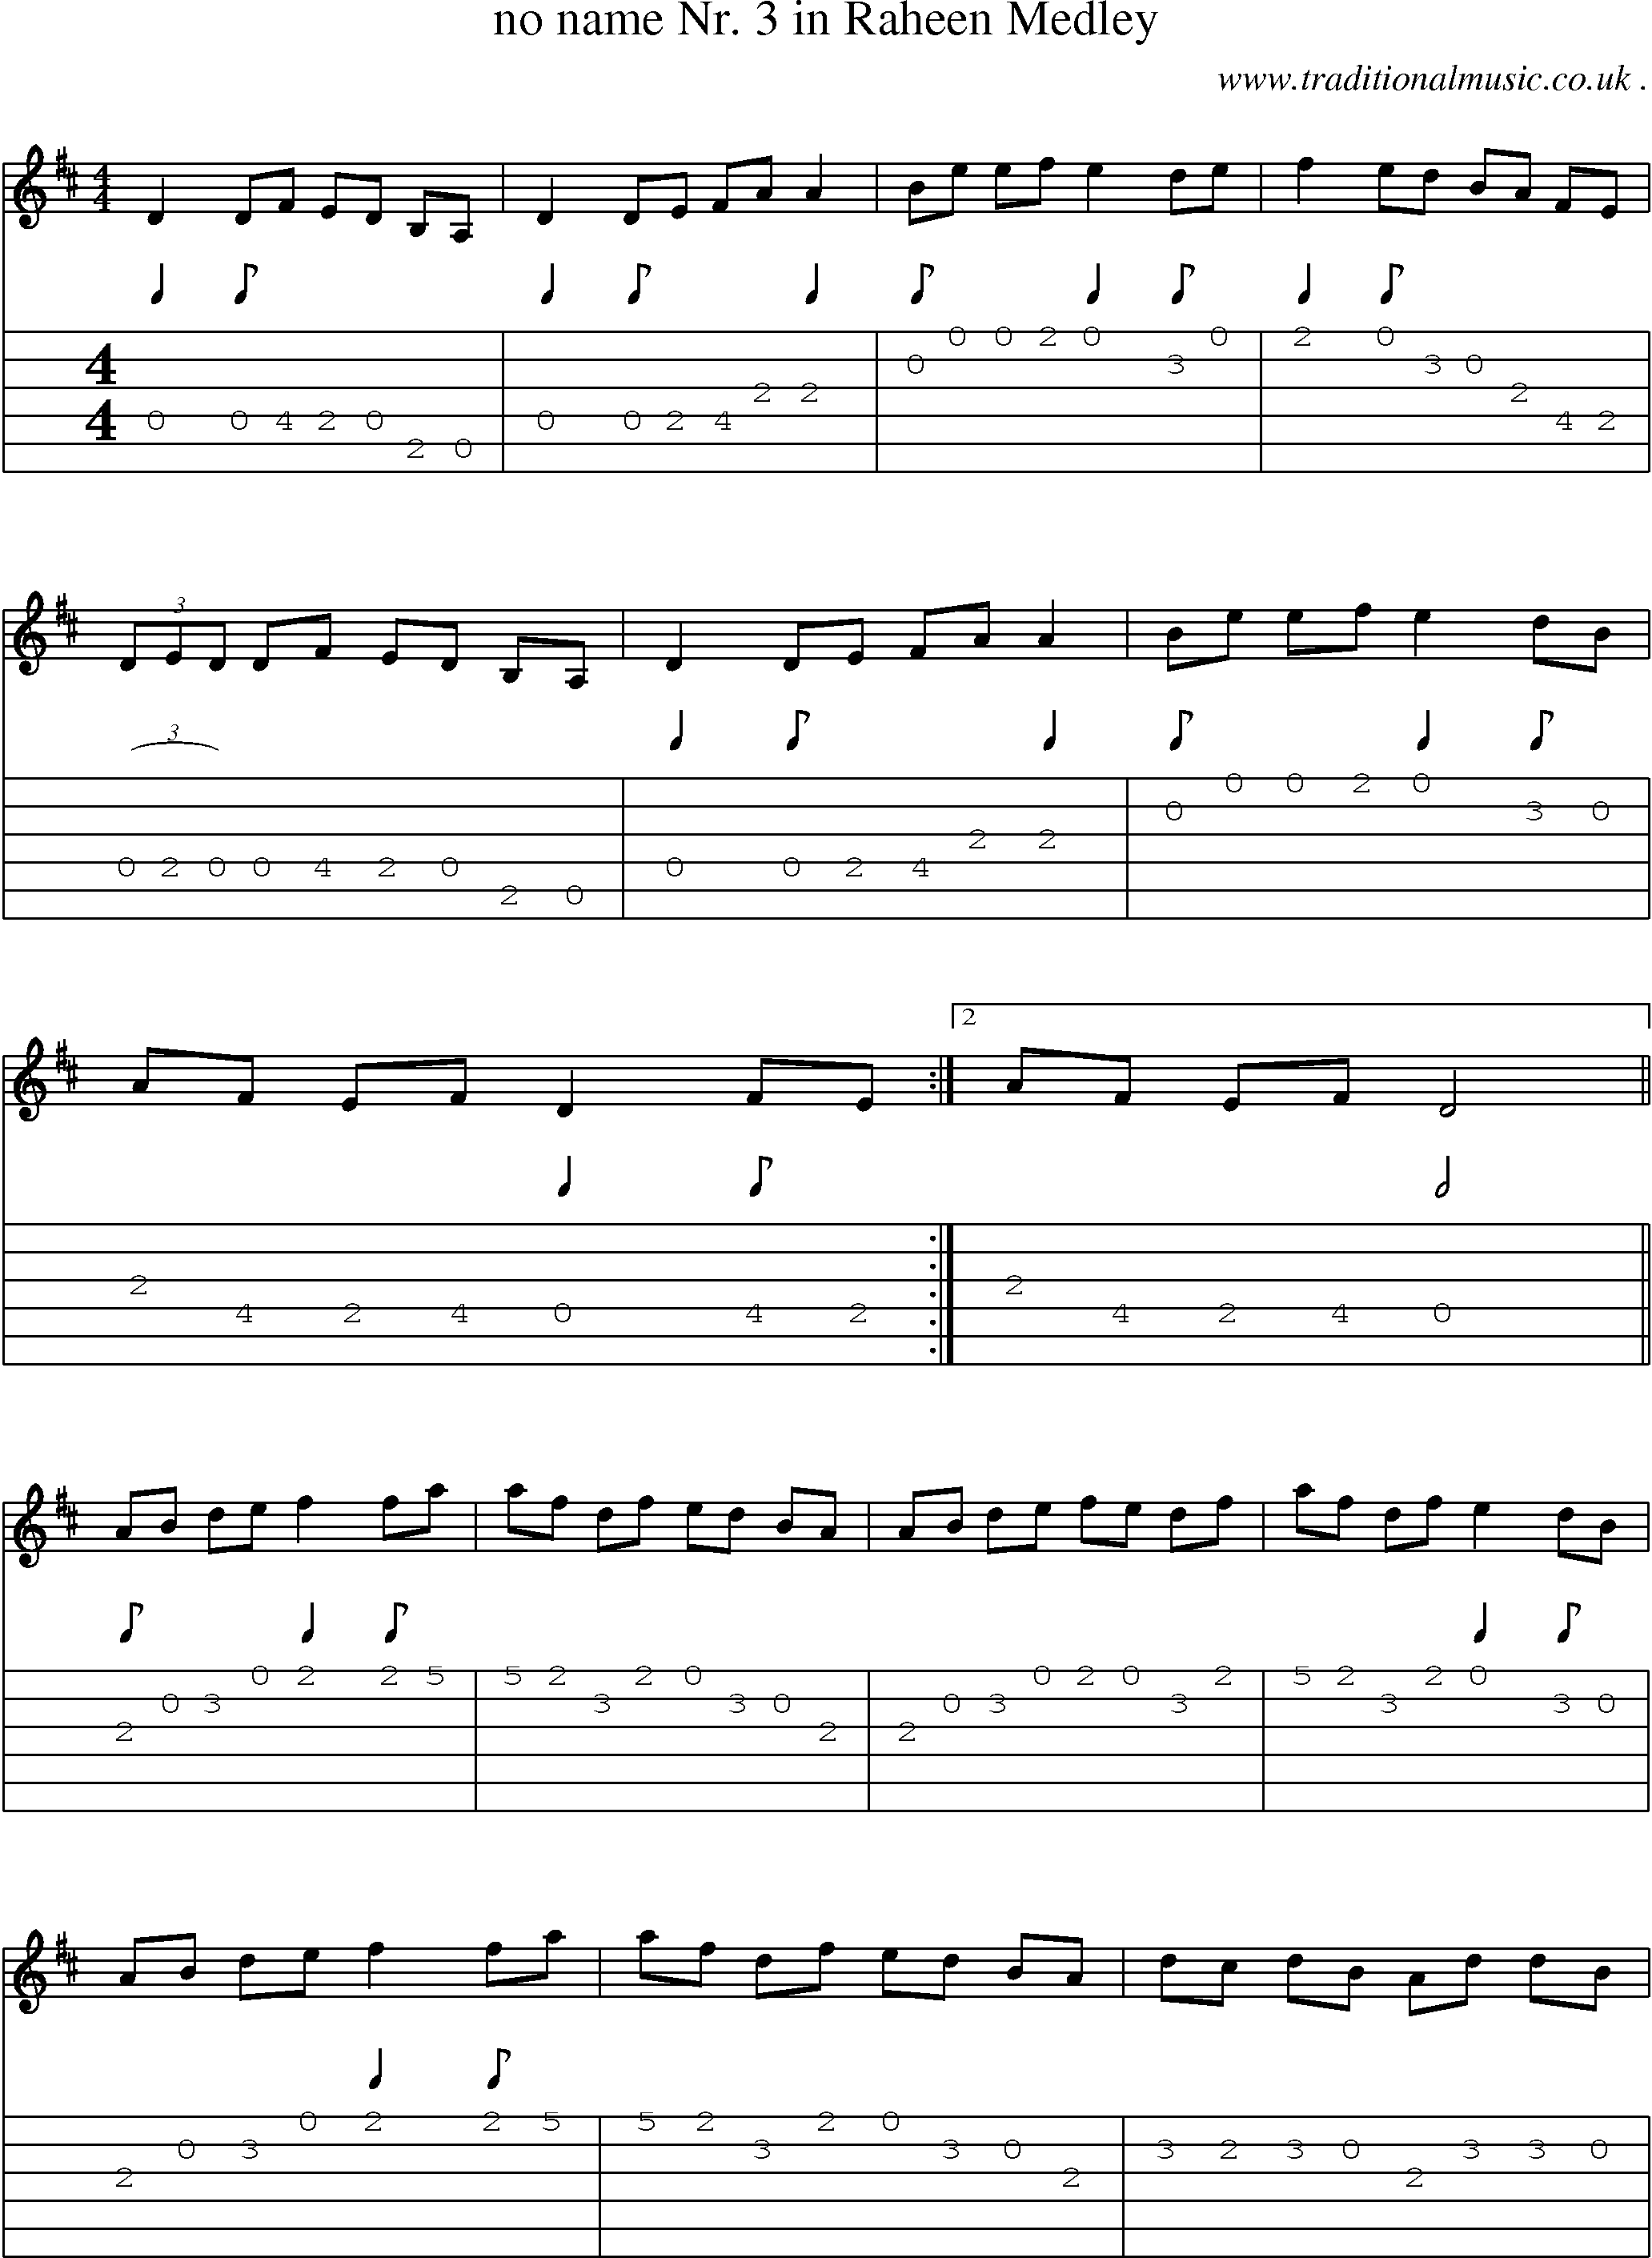 Sheet-Music and Guitar Tabs for No Name Nr 3 In Raheen Medley